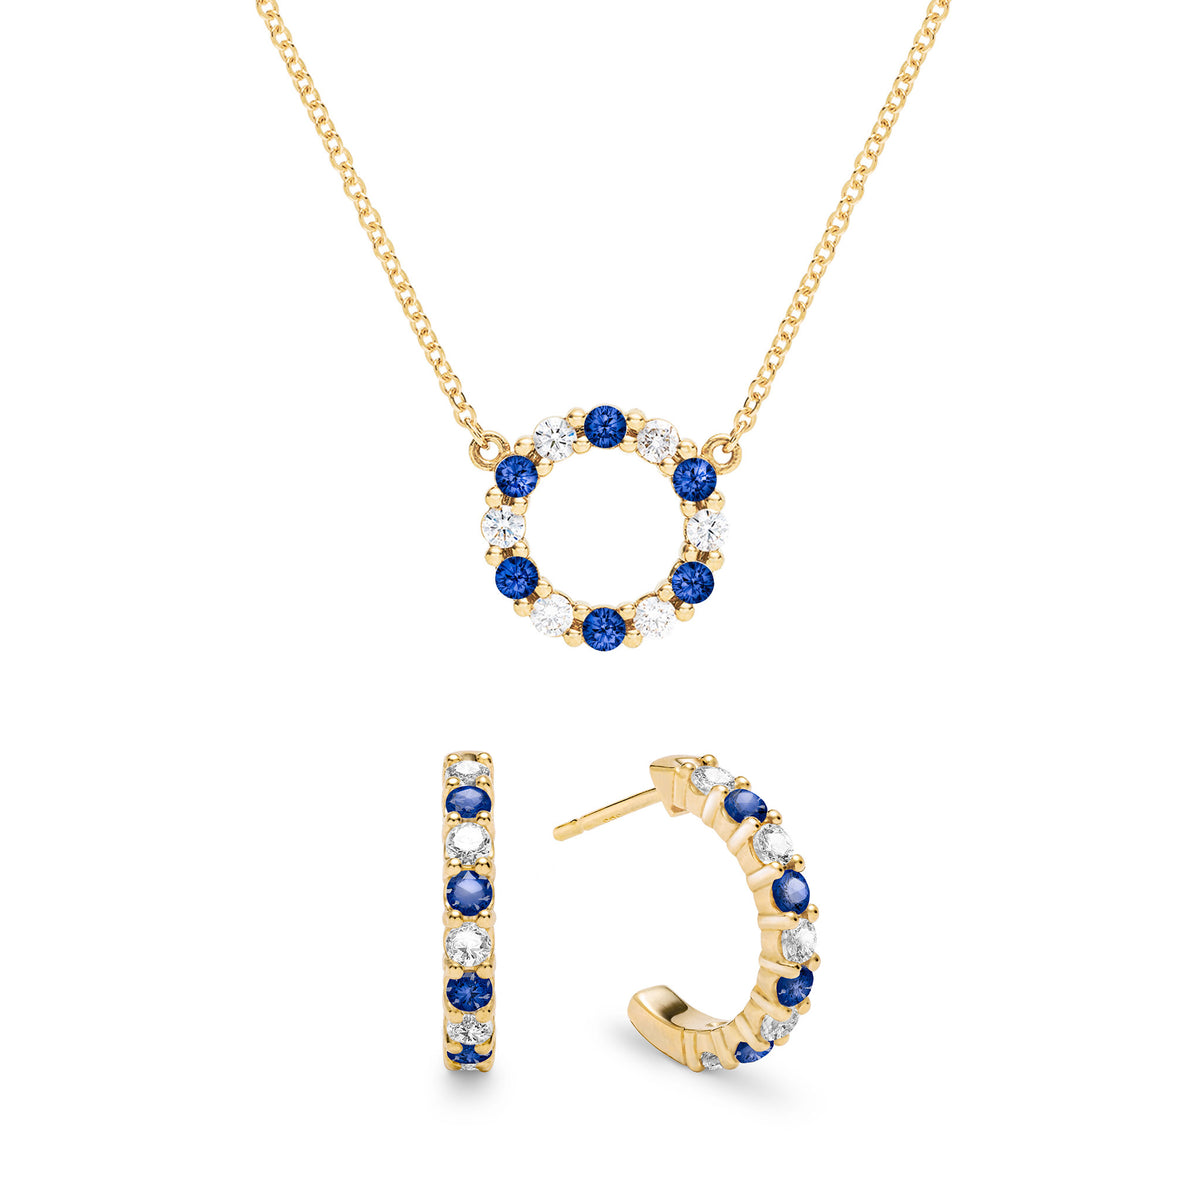 Buy ACCESSHER Rose Gold plated American Diamond with Sapphire blue stone Necklace  set with Earrings for women and girls at Amazon.in